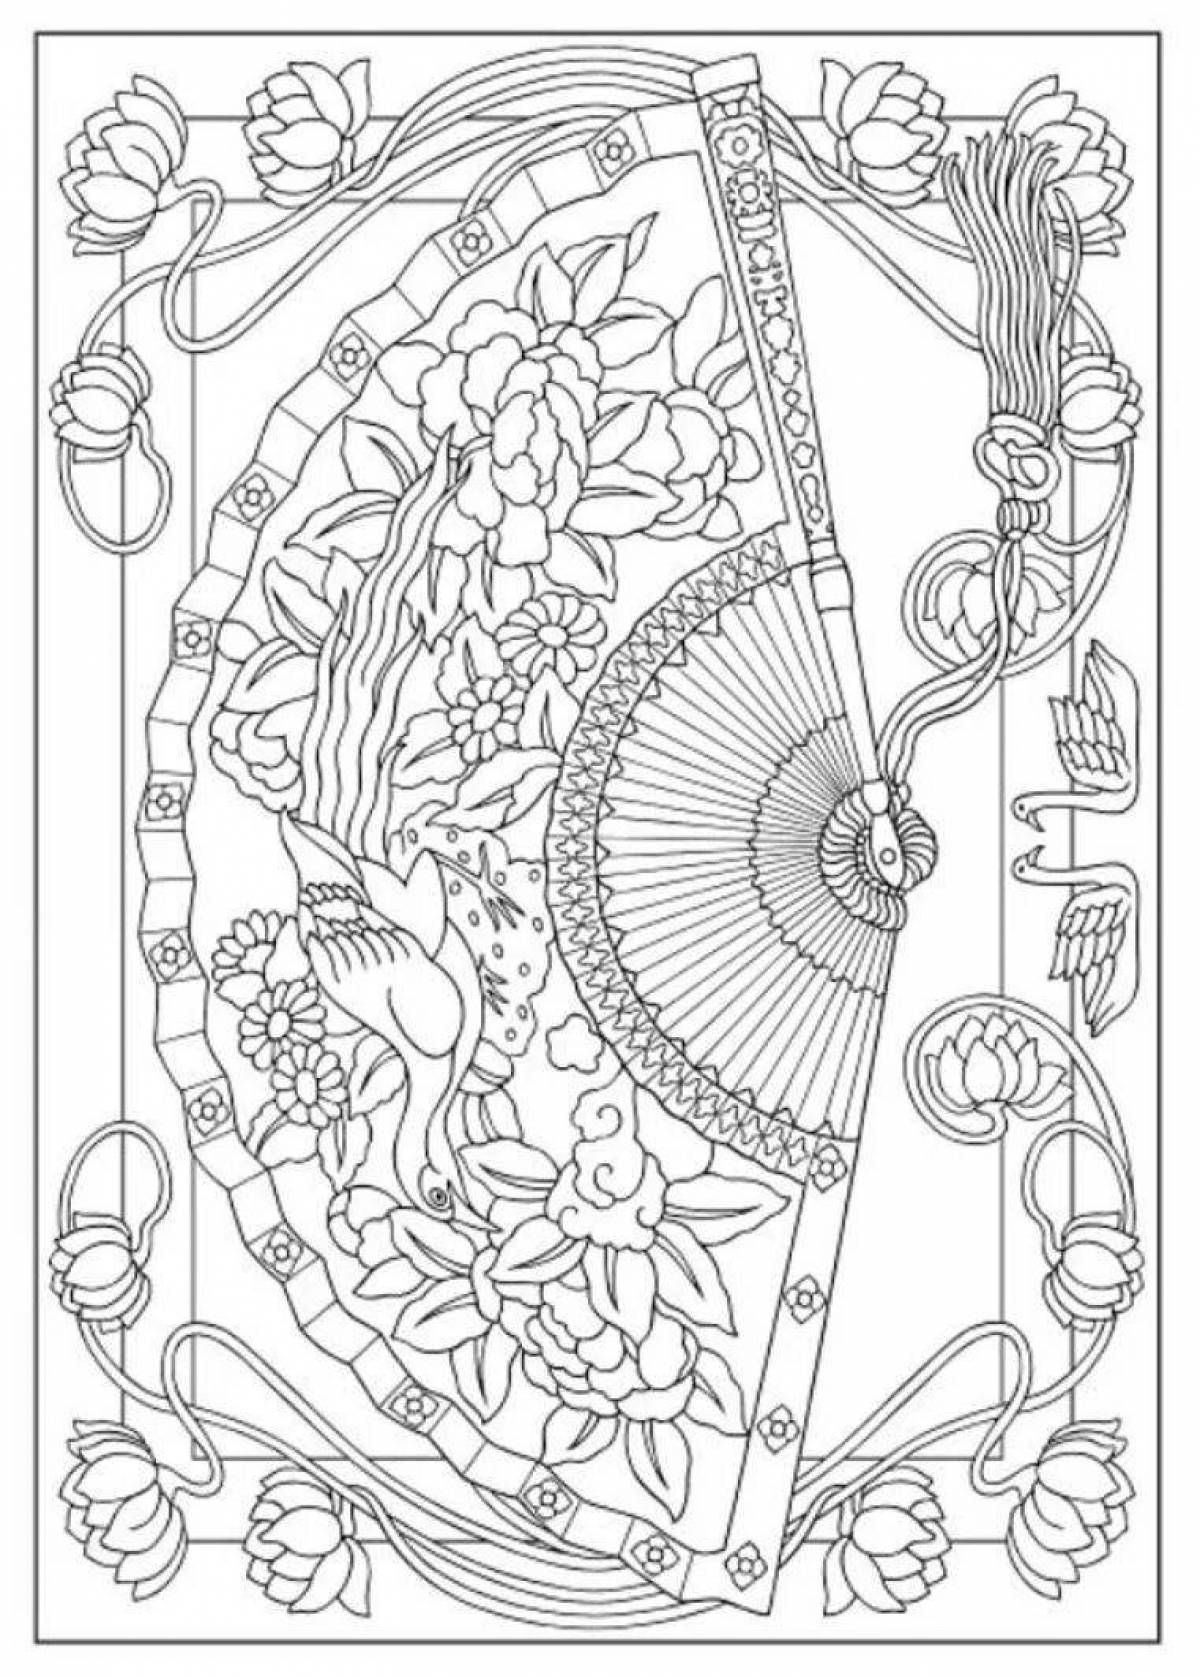 Creative haven coloring page - whimsical